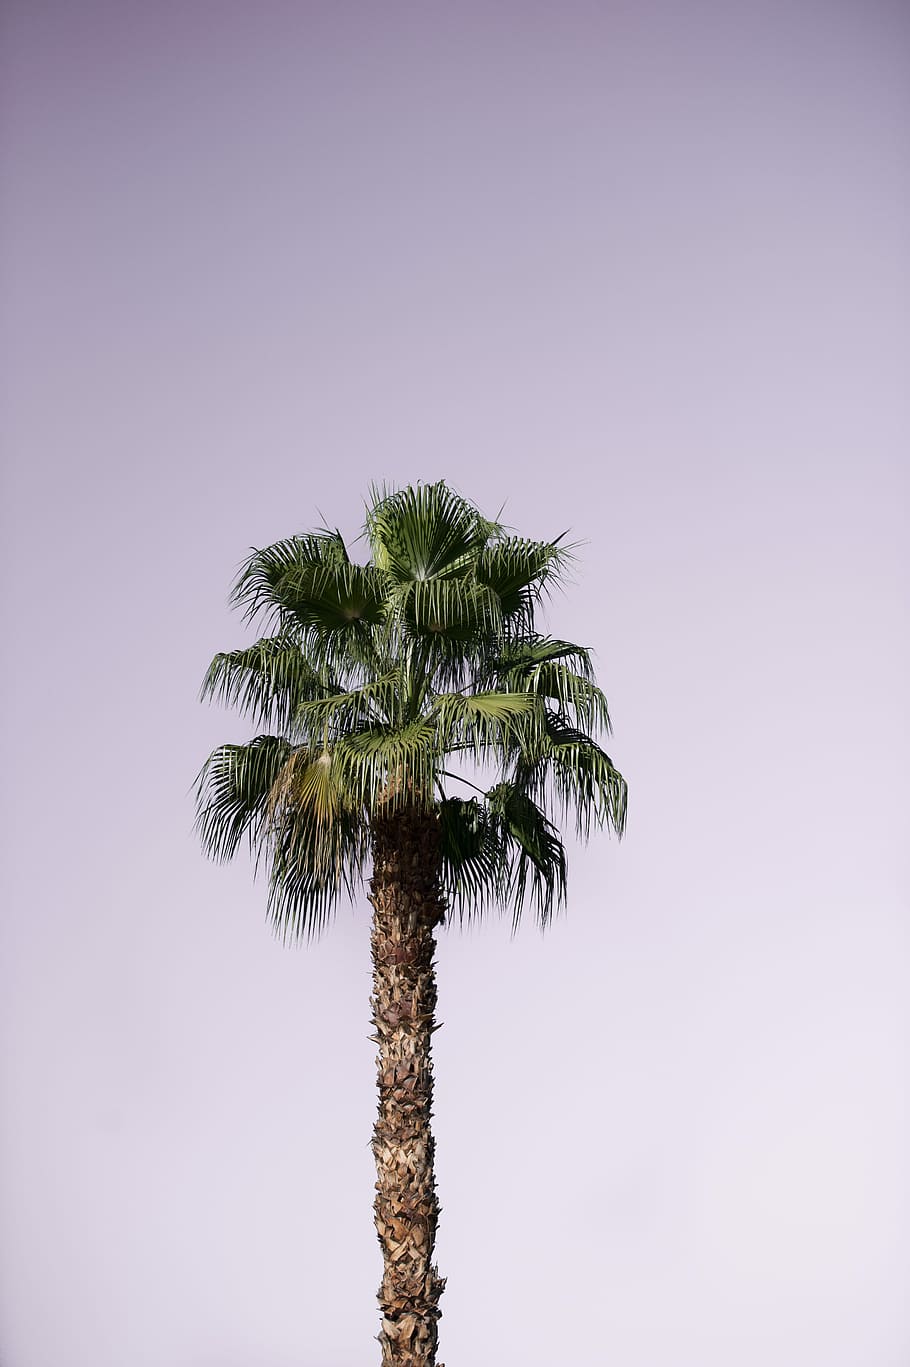 green and brown tree, coconut treee, palm tree, white, sky, pink